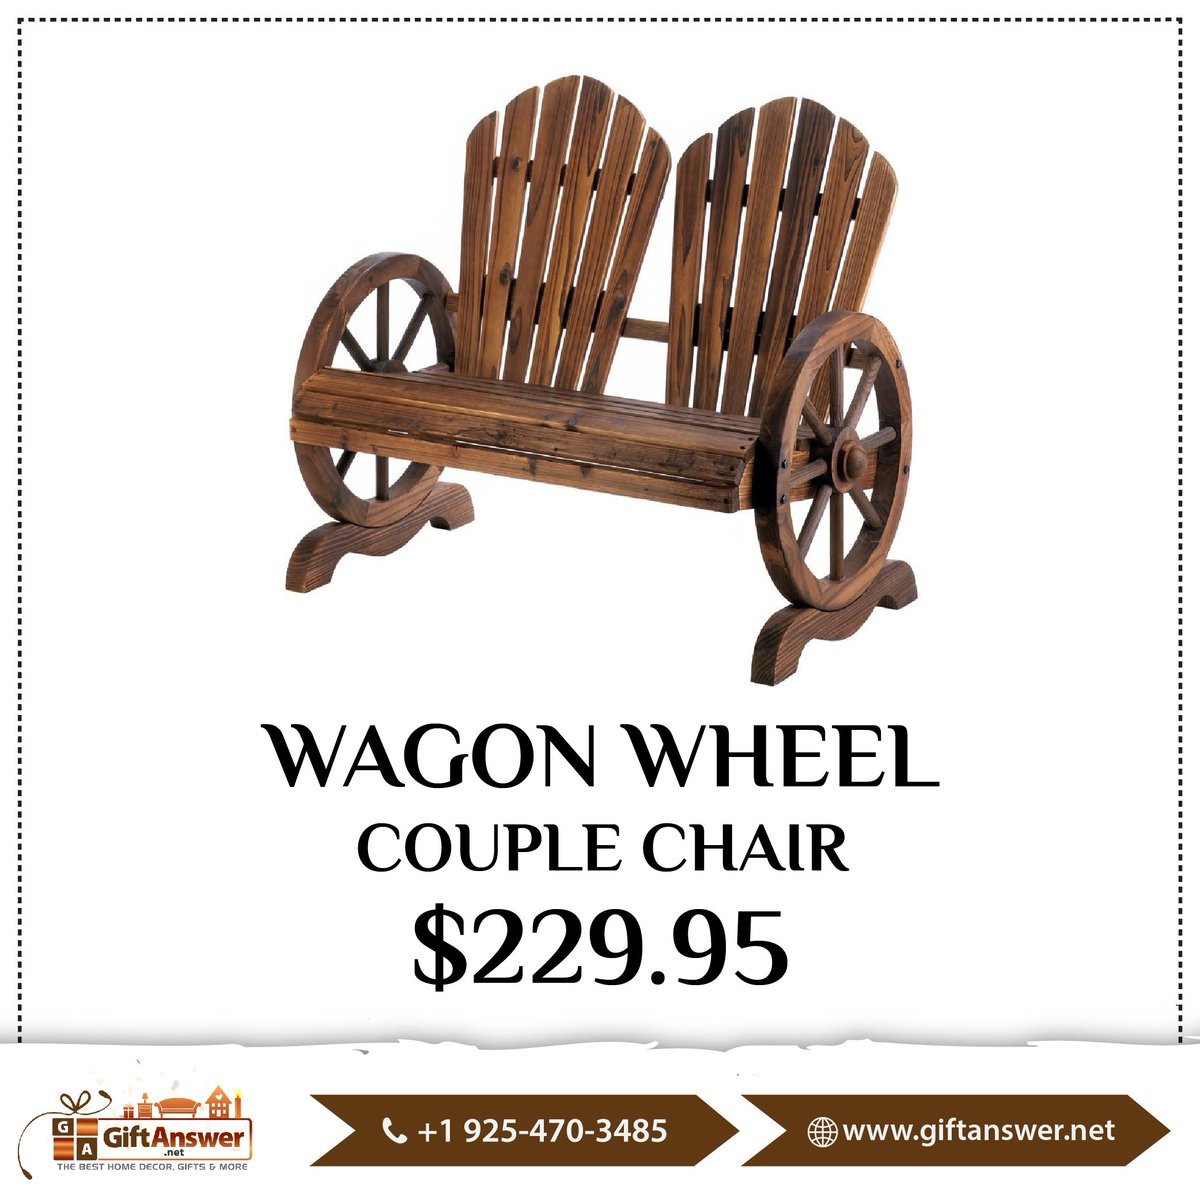 Spend some quality time outdoors with this incredibly charming rustic bench. It features wagon wheels book-ending a wooden seat with classic flared backs. It’s the best seat to enjoy starry nights and warm days!

#giftanswer #PatioChairs #WAGONWHEELCOUPLECHAIR #Furniture